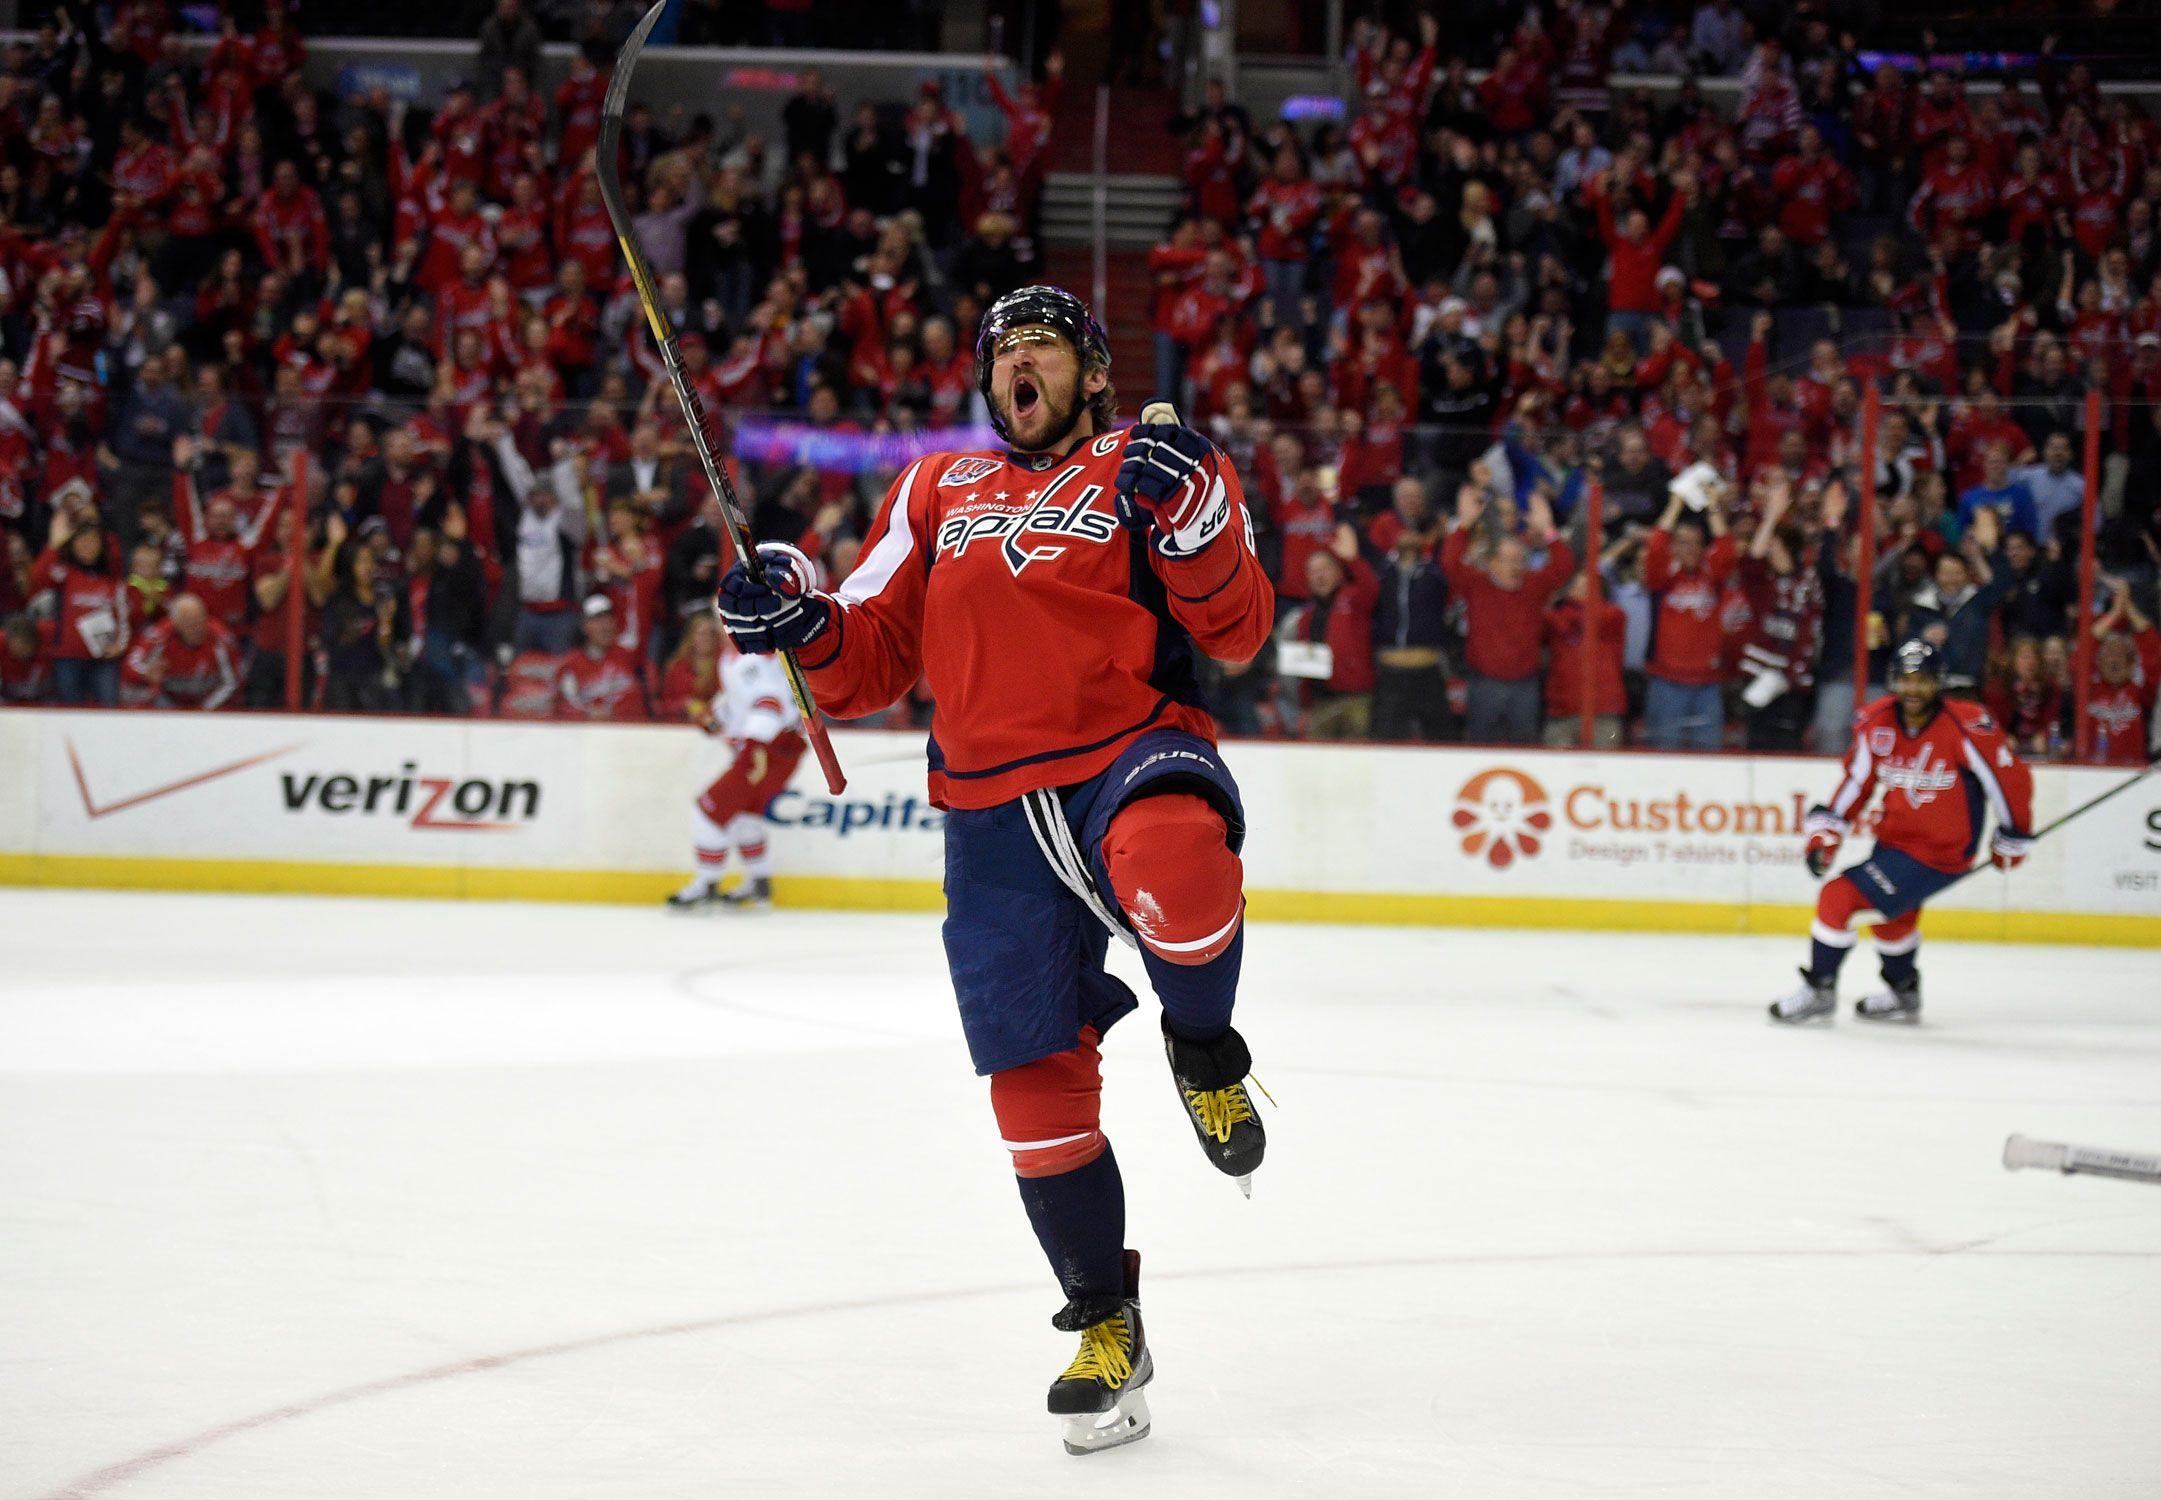 reasons the Caps can win it all in 2015